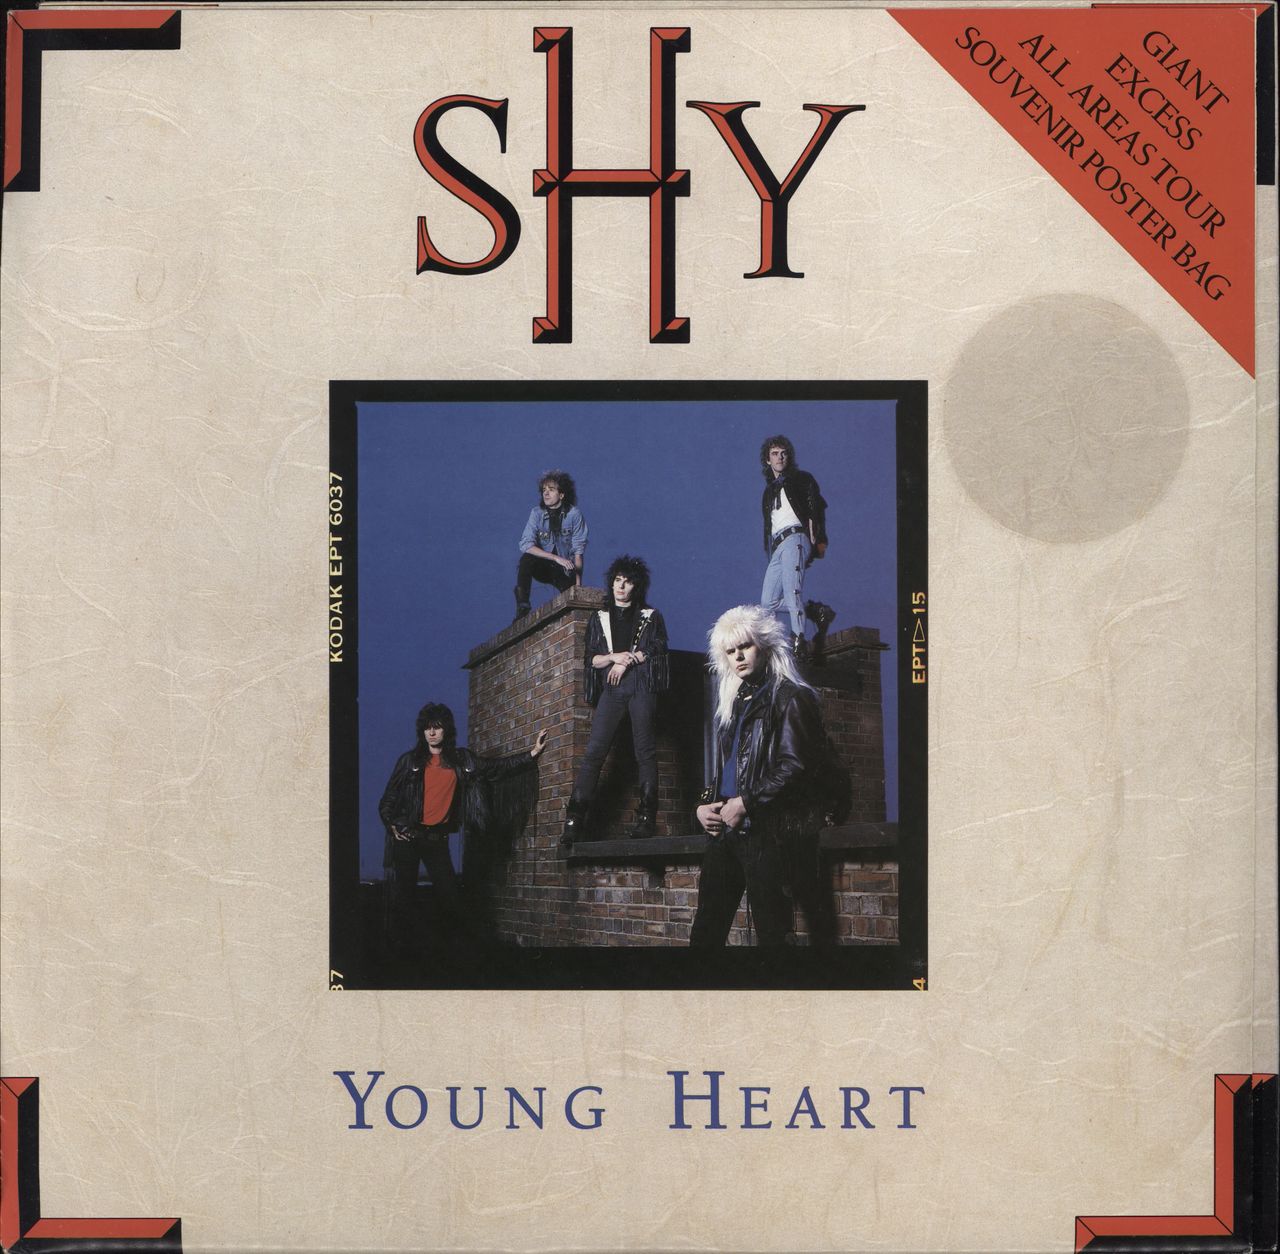 Shy Young Heart - Poster Sleeve UK 12" vinyl single (12 inch record / Maxi-single) PT41296P